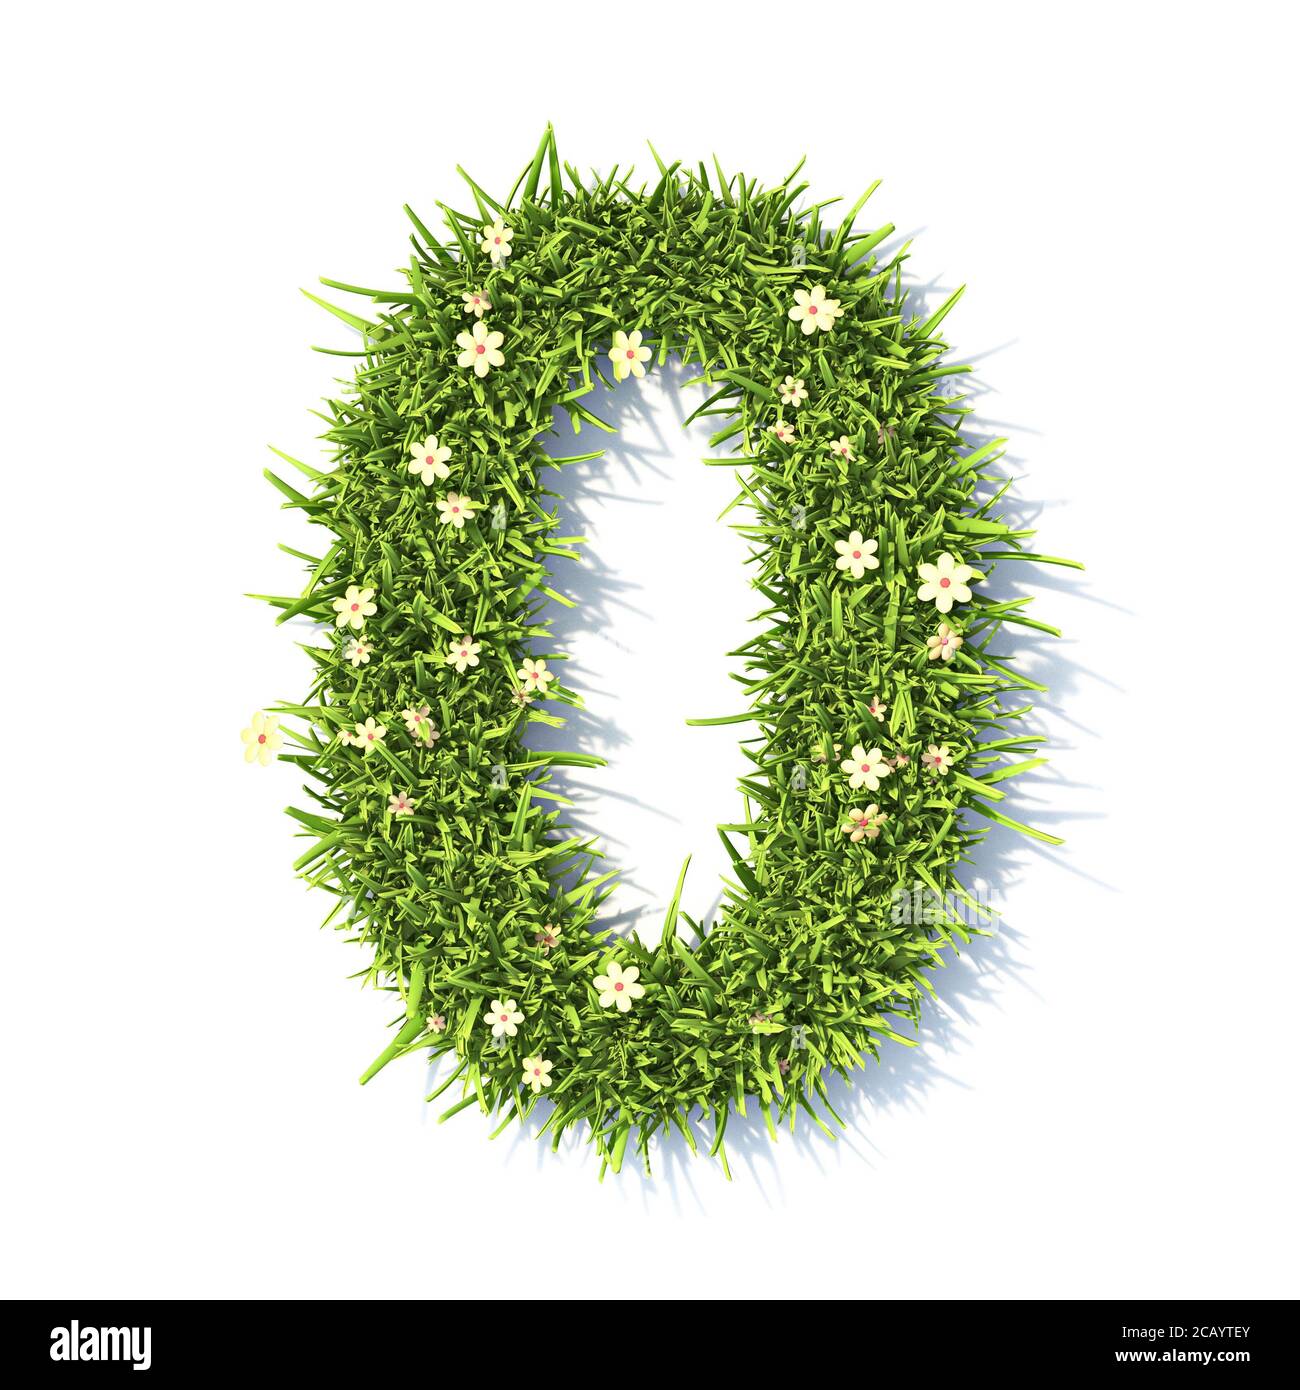 Grass font Number 0 ZERO 3D rendering illustration isolated on white background Stock Photo